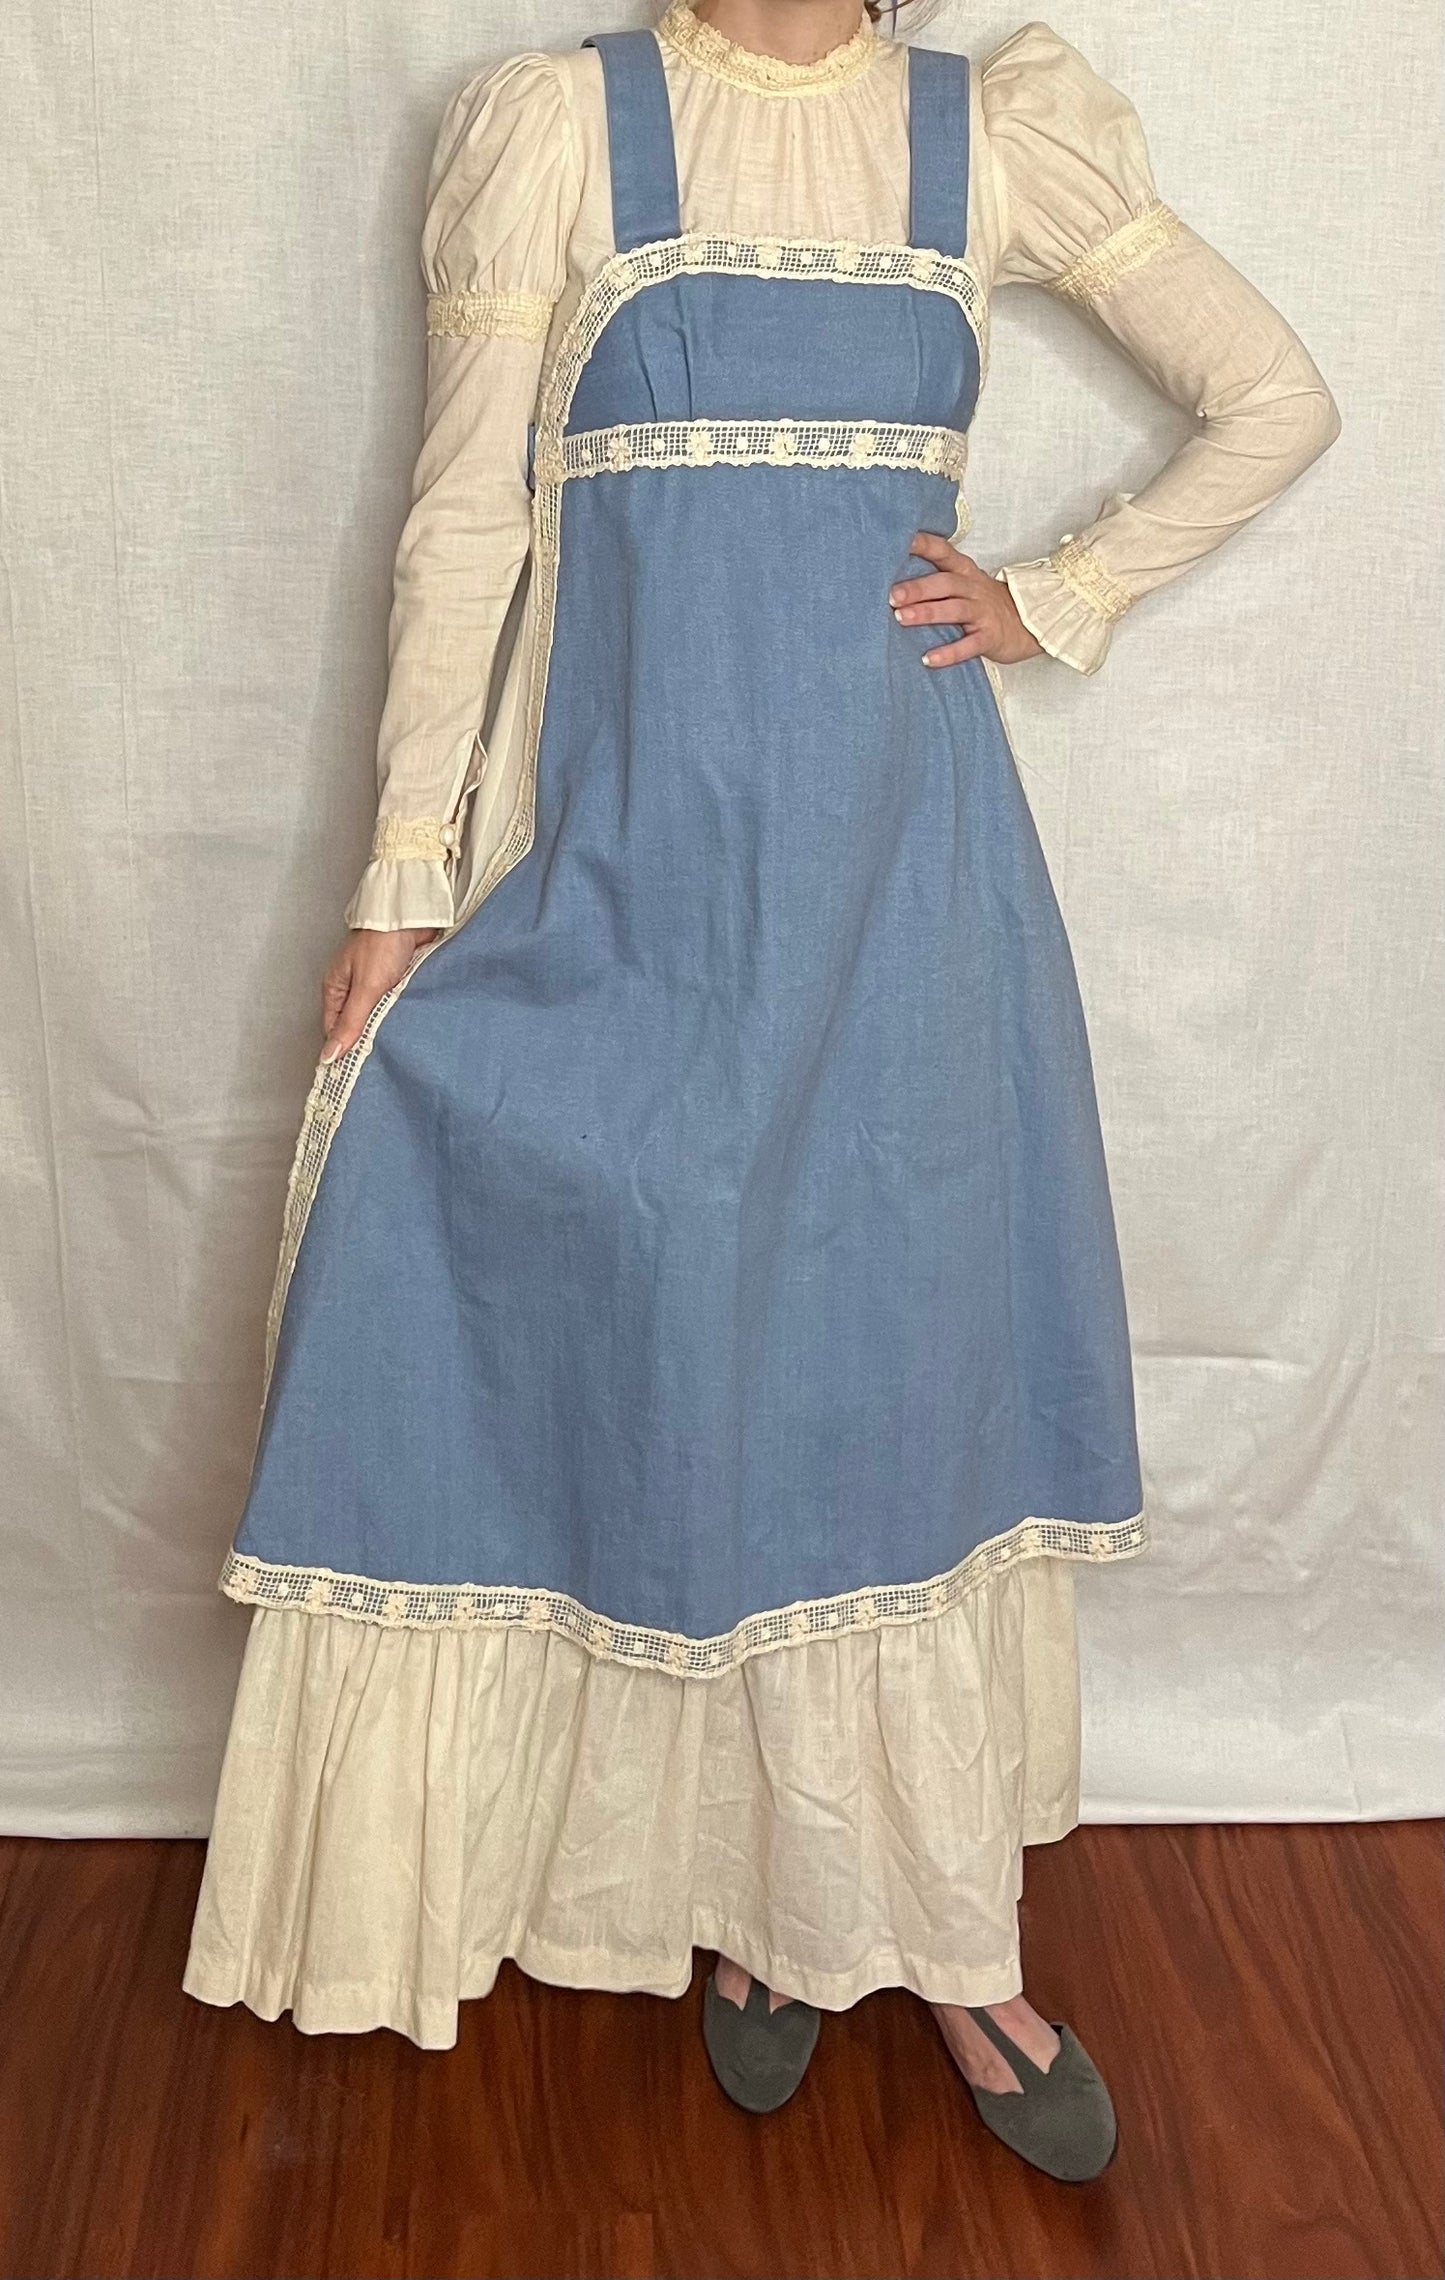 Vintage 1960’s "Gunne Sax of California" Denim Chambray and Cotton Muslin Apron Front Long Sleeve Maxi Dress